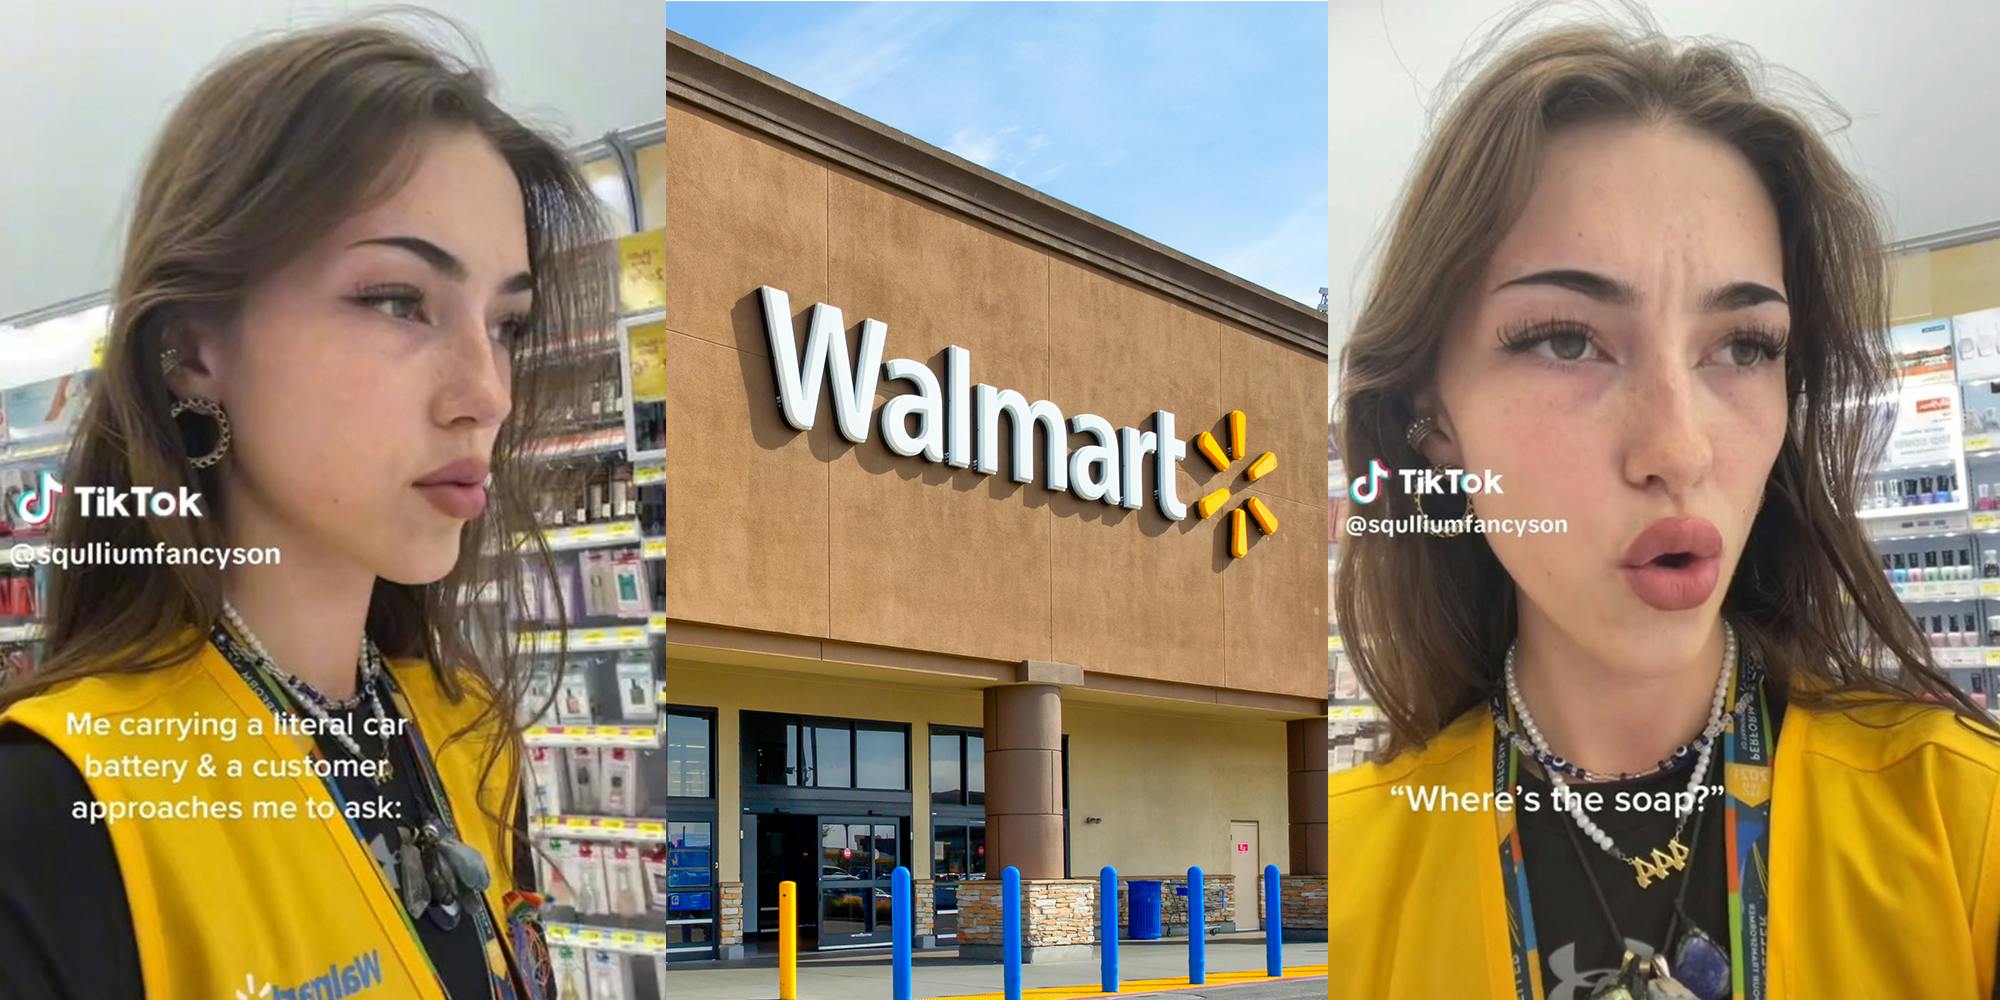 Walmart worker complains about customers who interrupt them during busy tasks to ask questions